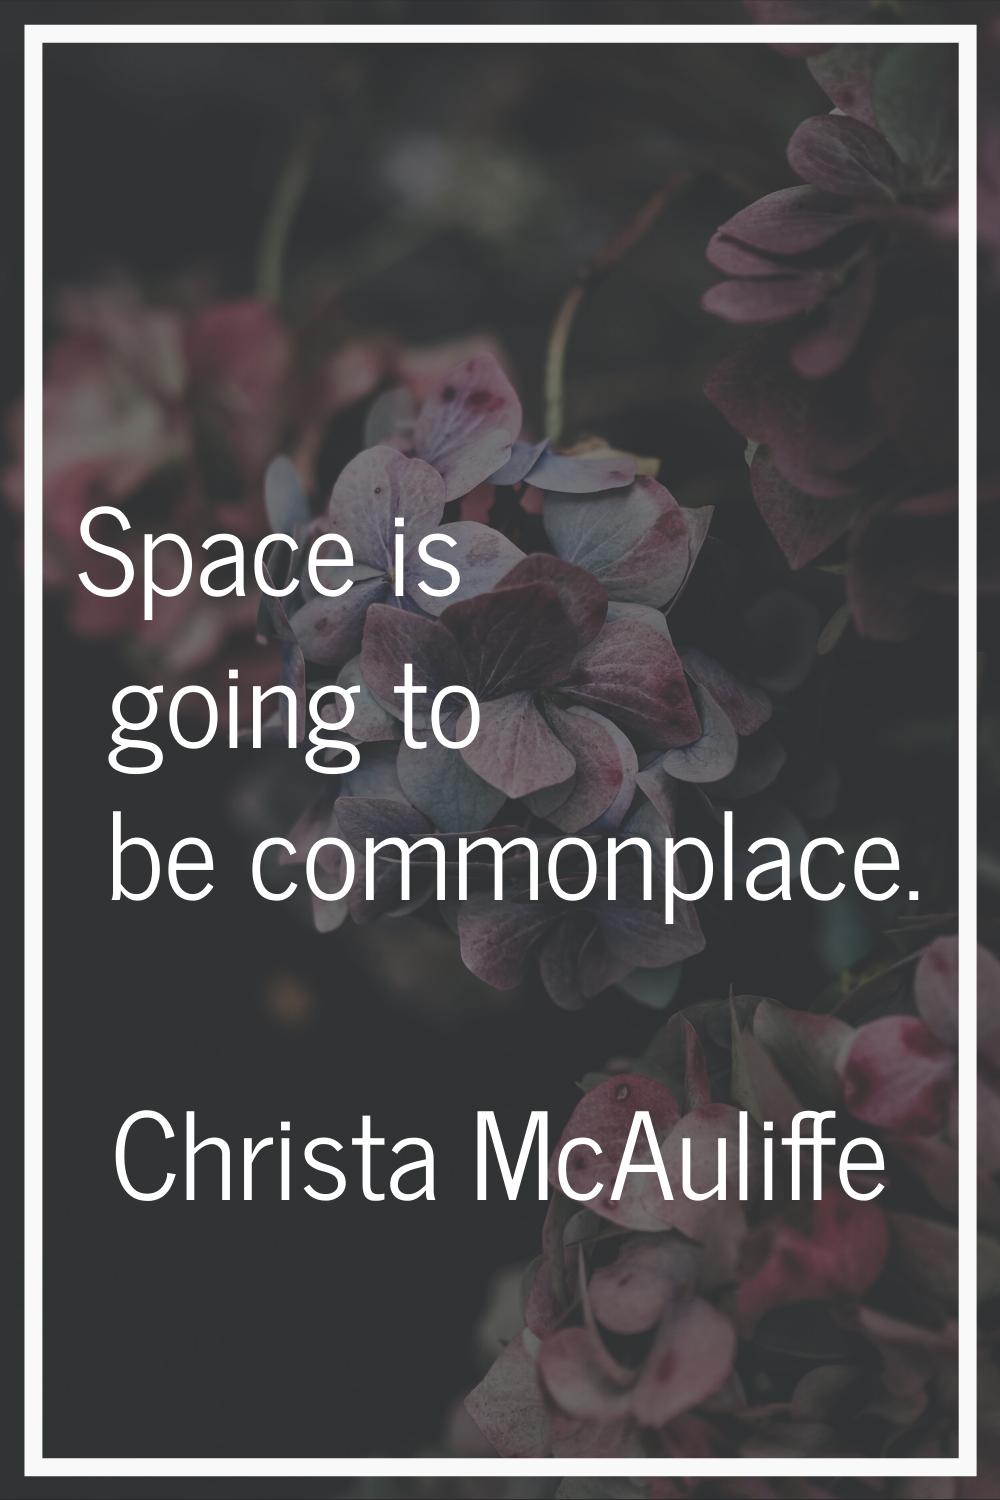 Space is going to be commonplace.